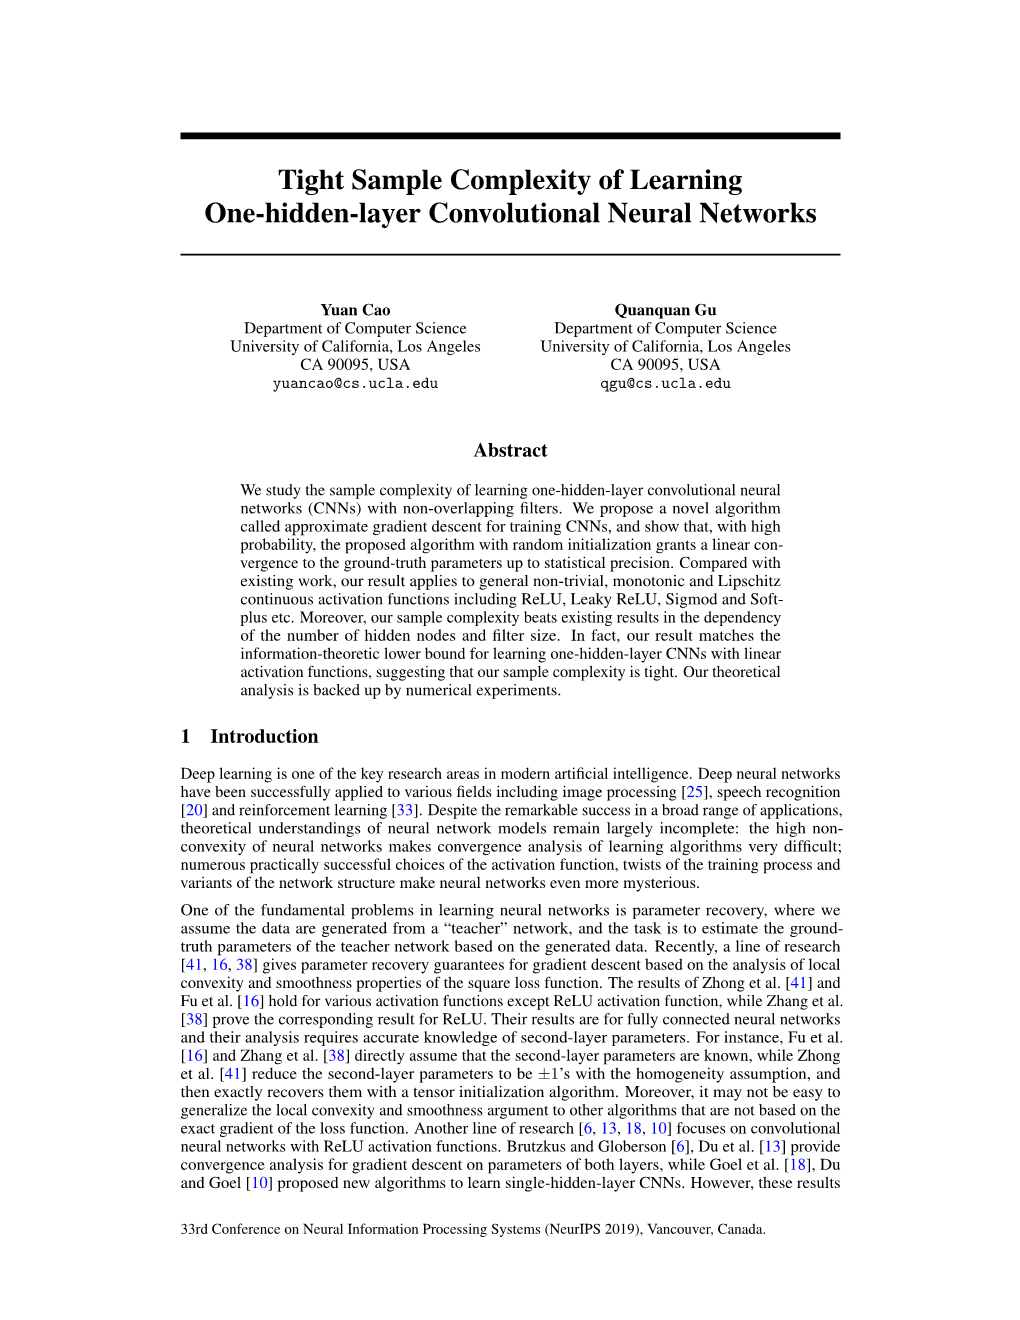 Tight Sample Complexity of Learning One-Hidden-Layer Convolutional Neural Networks